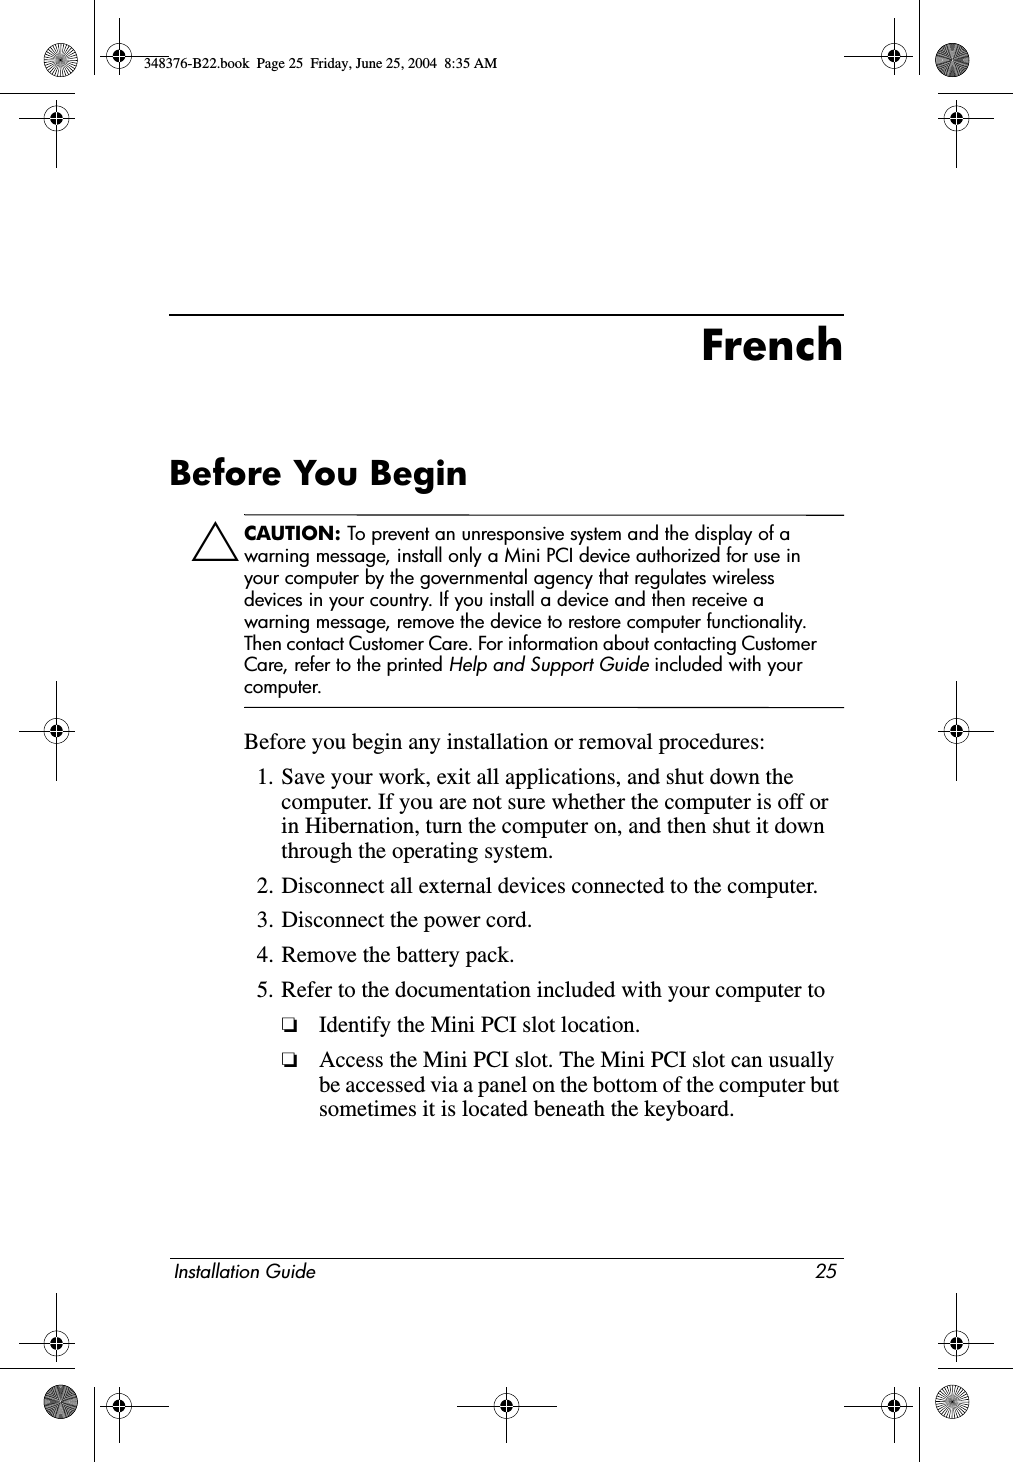 Installation Guide 25FrenchBefore You BeginÄCAUTION: To prevent an unresponsive system and the display of a warning message, install only a Mini PCI device authorized for use in your computer by the governmental agency that regulates wireless devices in your country. If you install a device and then receive a warning message, remove the device to restore computer functionality. Then contact Customer Care. For information about contacting Customer Care, refer to the printed Help and Support Guide included with your computer.Before you begin any installation or removal procedures:1. Save your work, exit all applications, and shut down the computer. If you are not sure whether the computer is off or in Hibernation, turn the computer on, and then shut it down through the operating system.2. Disconnect all external devices connected to the computer.3. Disconnect the power cord.4. Remove the battery pack.5. Refer to the documentation included with your computer to❏Identify the Mini PCI slot location.❏Access the Mini PCI slot. The Mini PCI slot can usually be accessed via a panel on the bottom of the computer but sometimes it is located beneath the keyboard.348376-B22.book  Page 25  Friday, June 25, 2004  8:35 AM